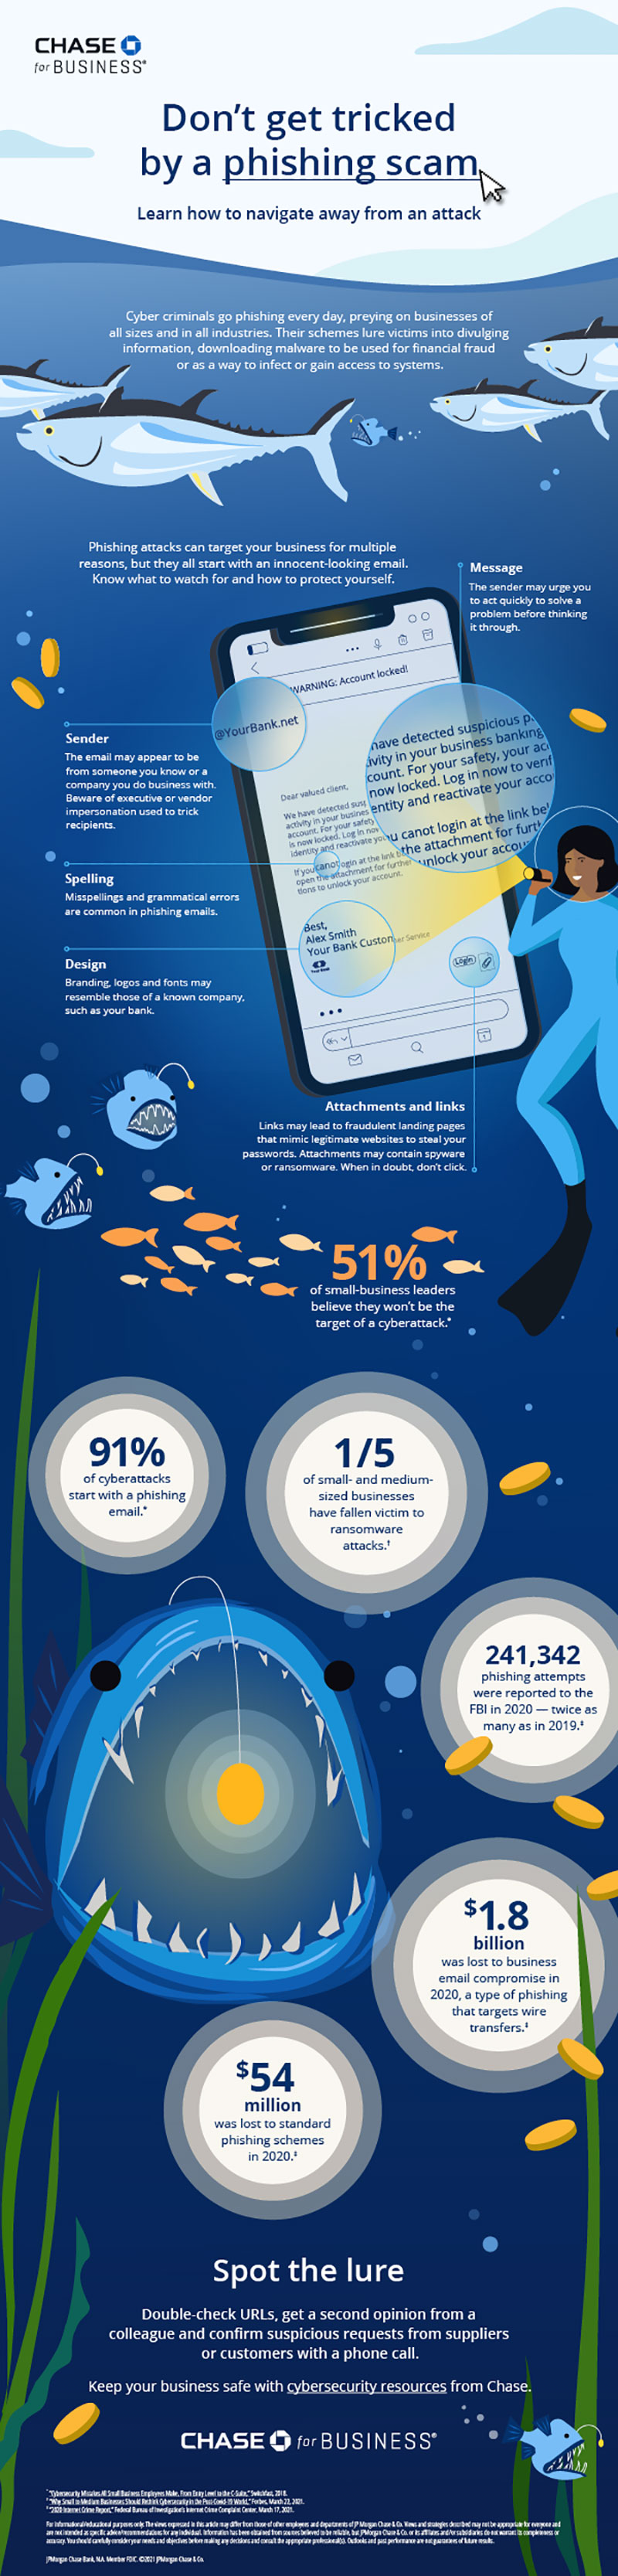 Don't get tricked by a phishing scam infographic